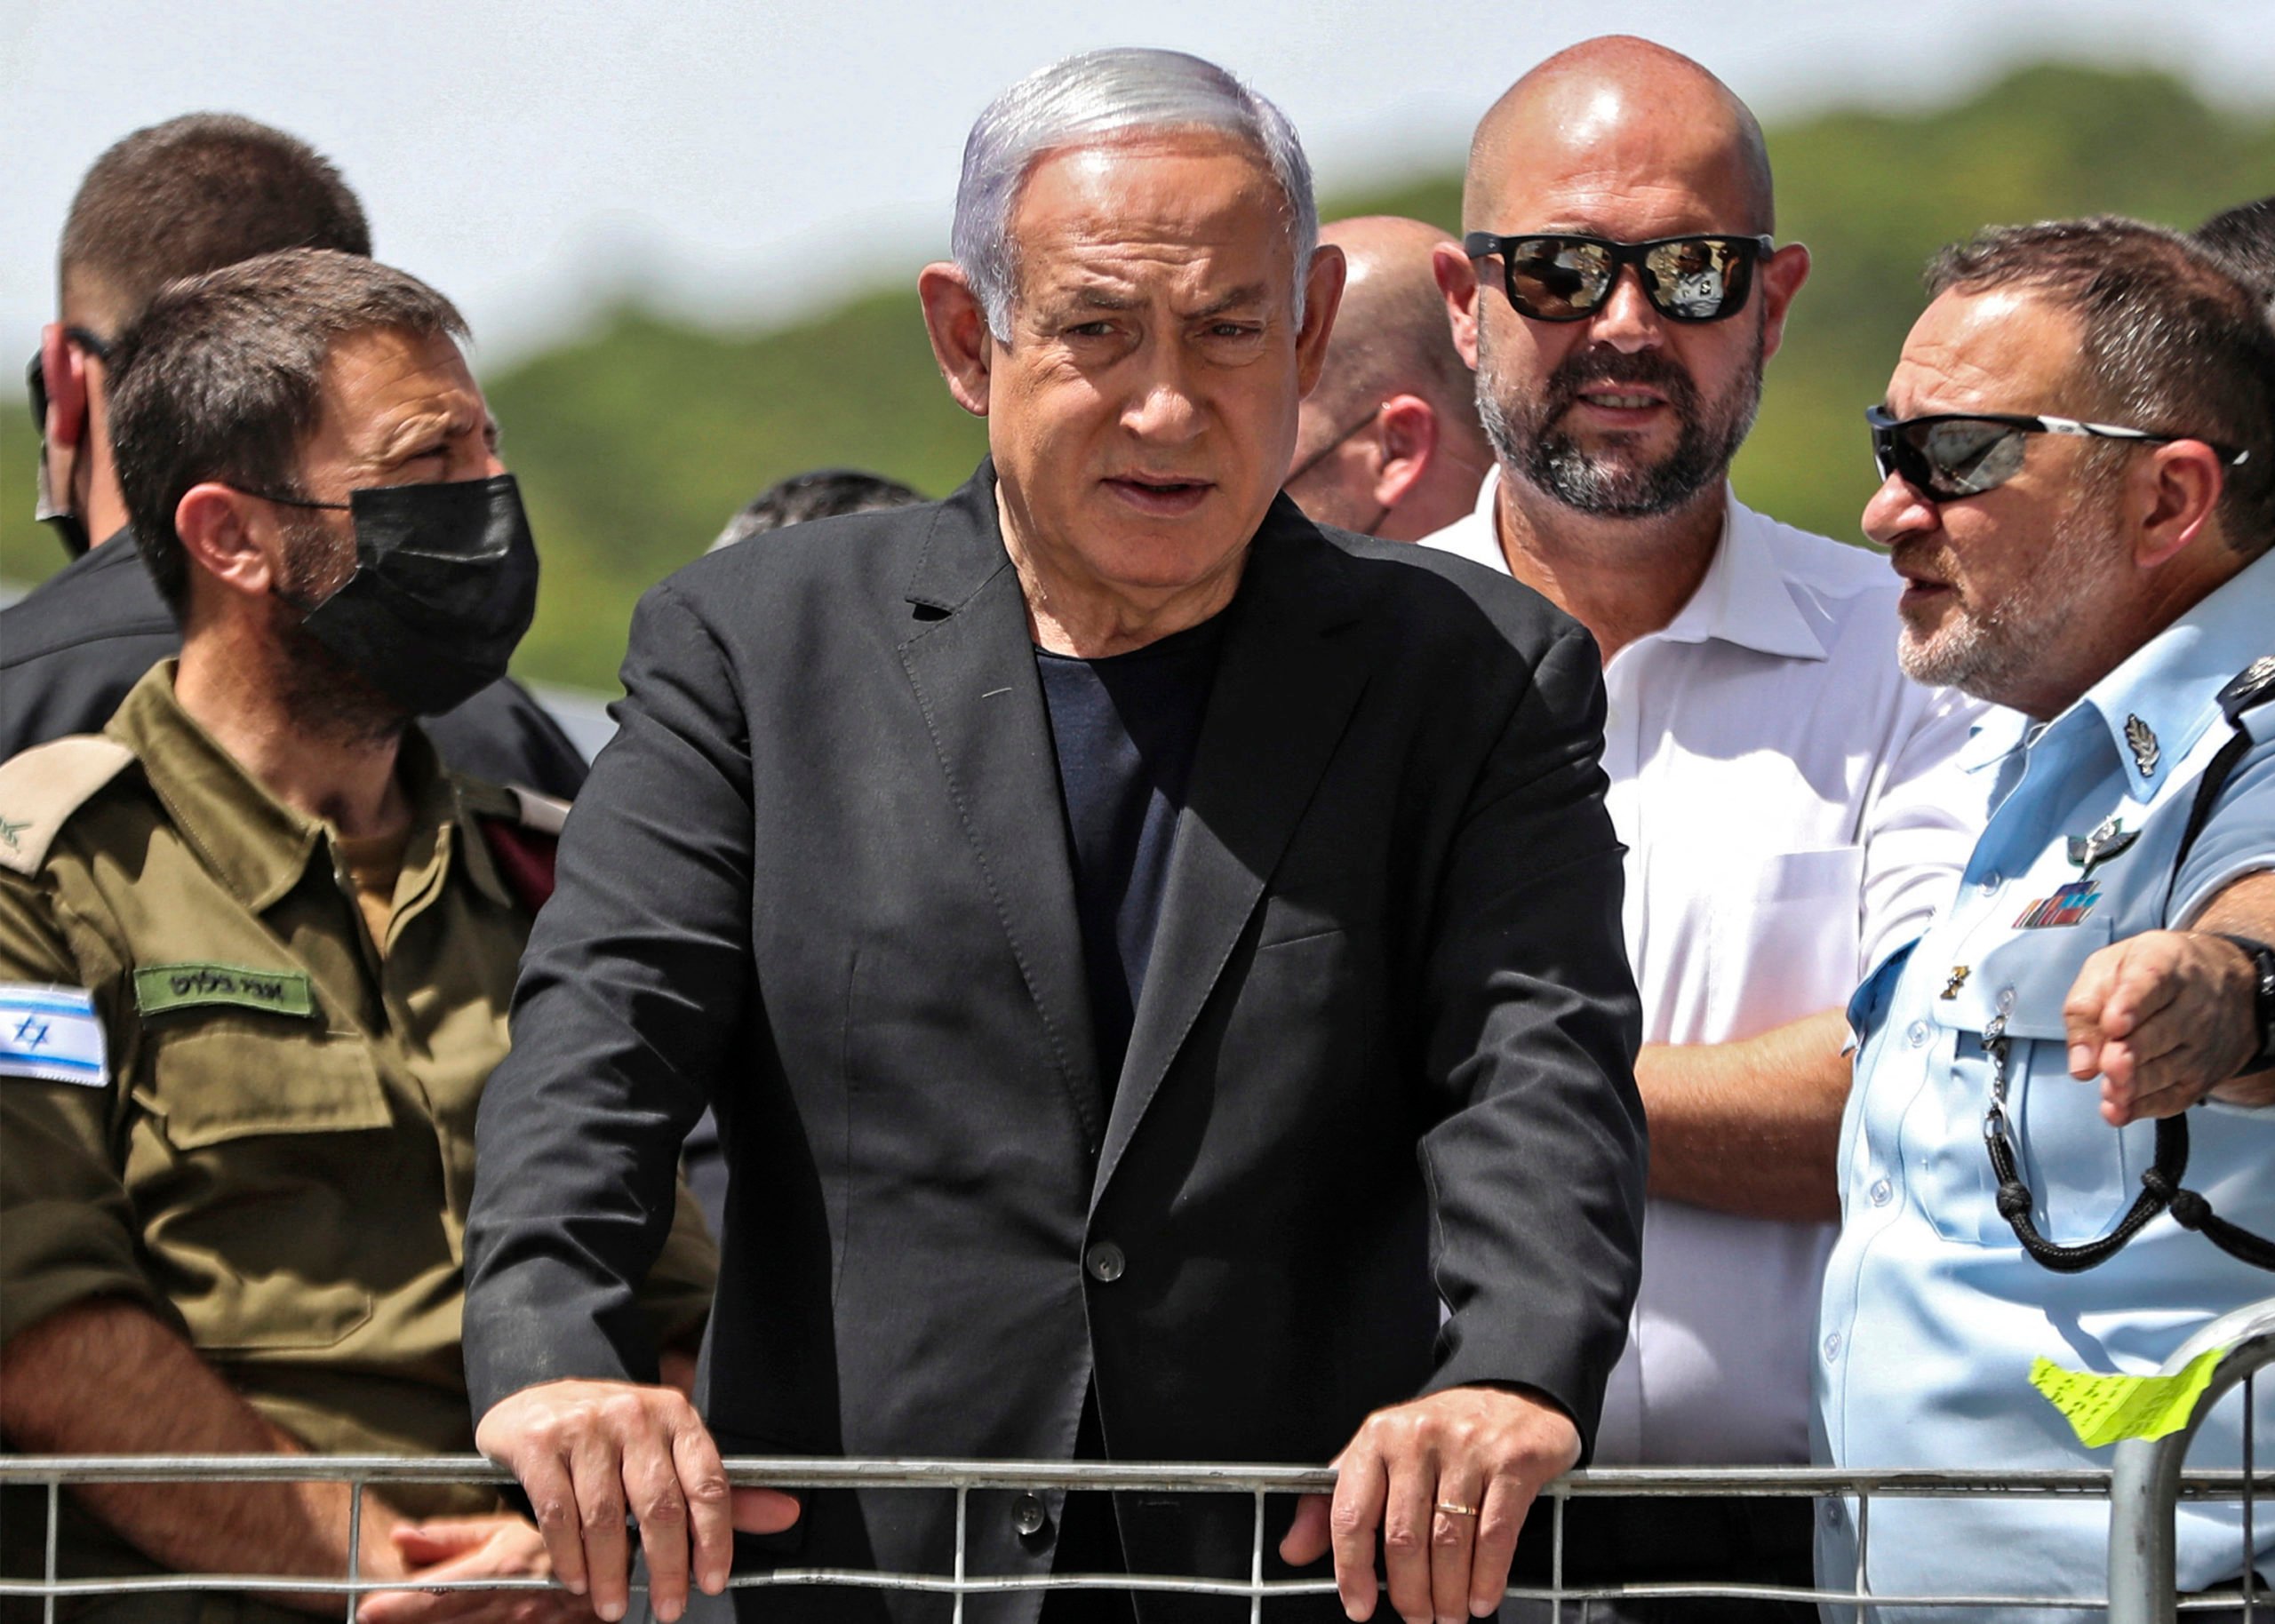 Israeli Prime Minister Benjamin Netanyahu visits the site of an overnight stampede during an ultra-Orthodox religious gathering in the northern Israeli town of Meron, on April 30, 2021. (RONEN ZVULUN/POOL/AFP via Getty Images)